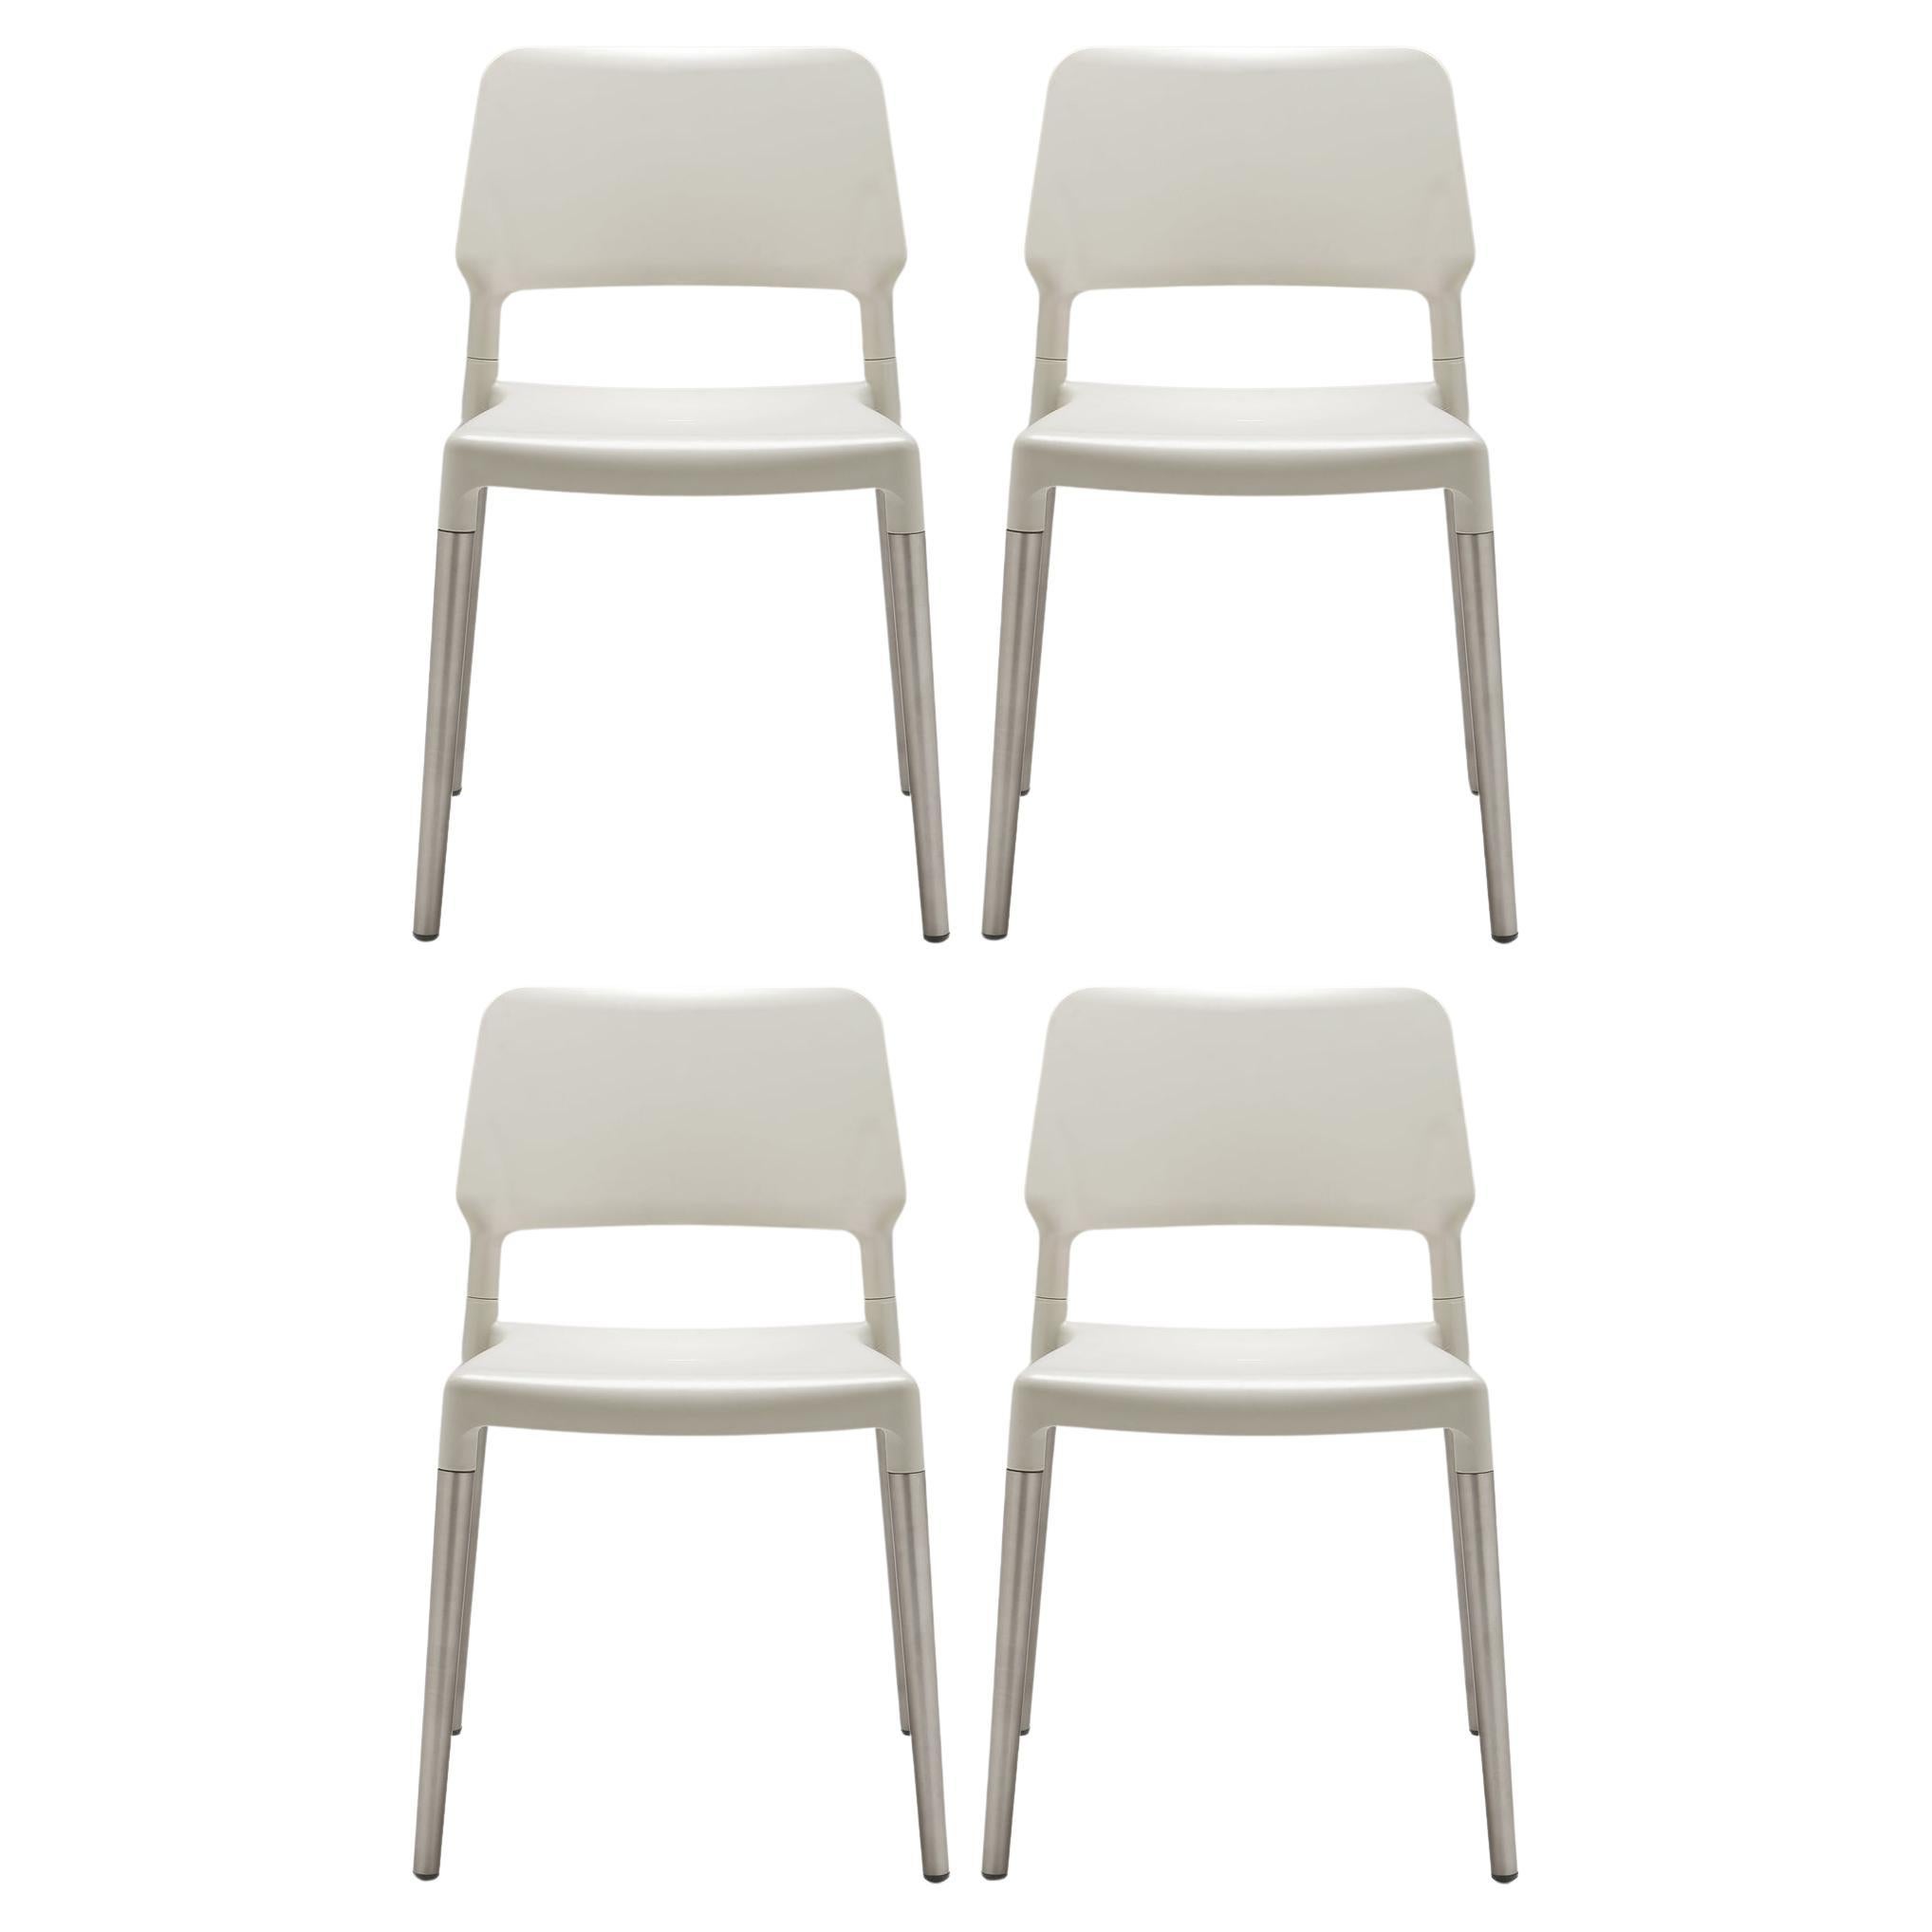 Set of 4 Aluminum Belloch Dining Chair by Lagranja Design For Sale